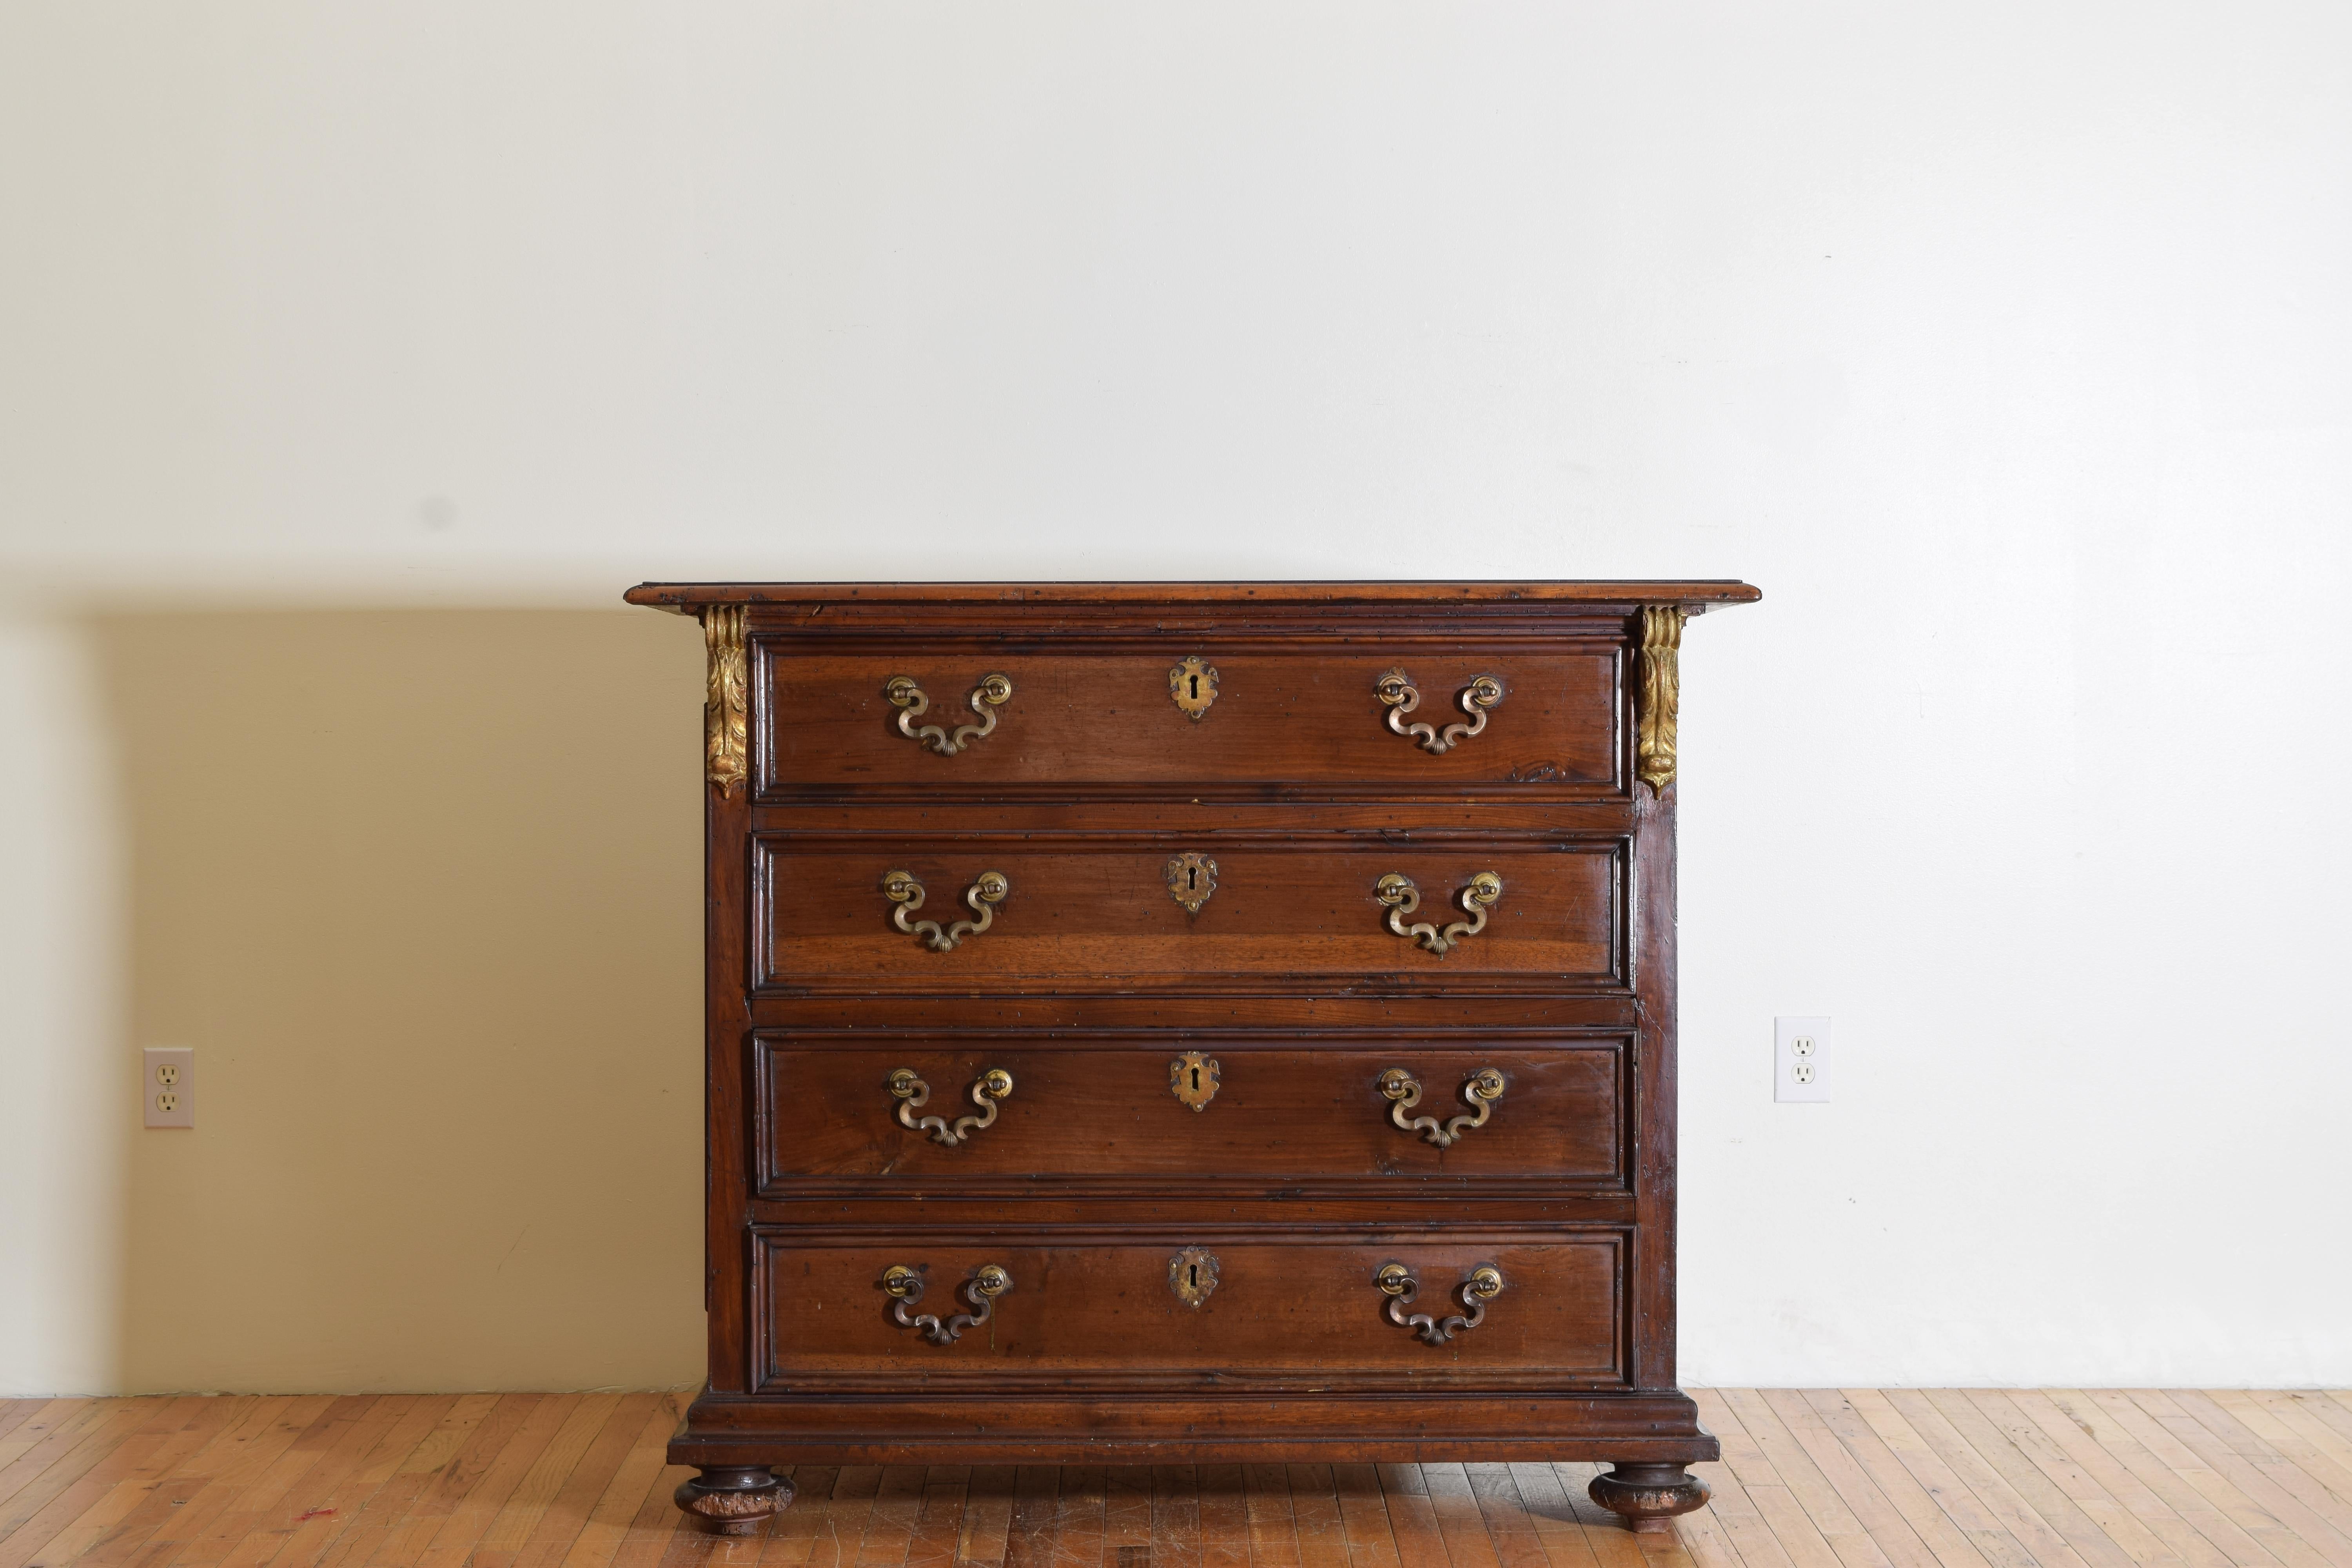 Having a rectangular top with molded edge above a conforming case housing four drawers with original bronze handles and escutcheons, giltwood leaf-form scrolls at upper front, the sides paneled, raised on original bun feet